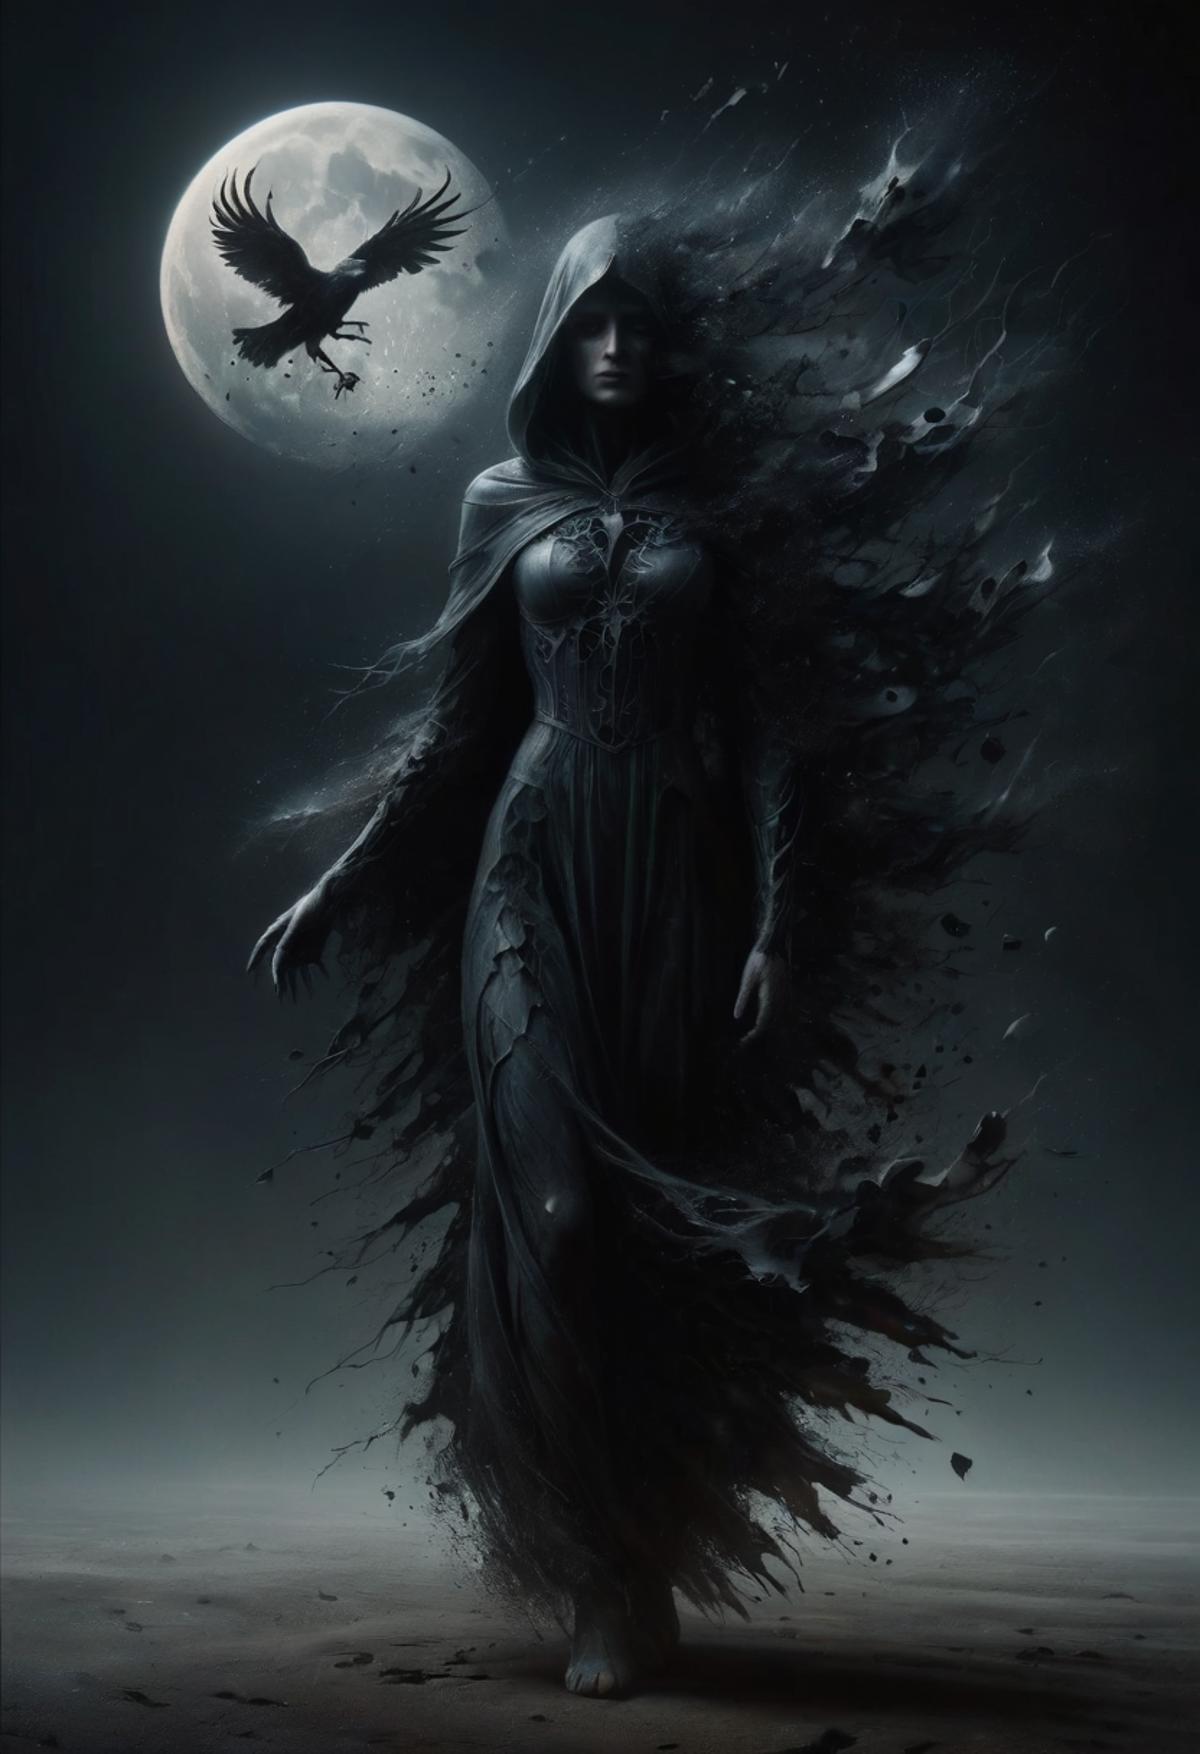 A woman in a flowing black cloak standing in front of a moonlit sky at night.